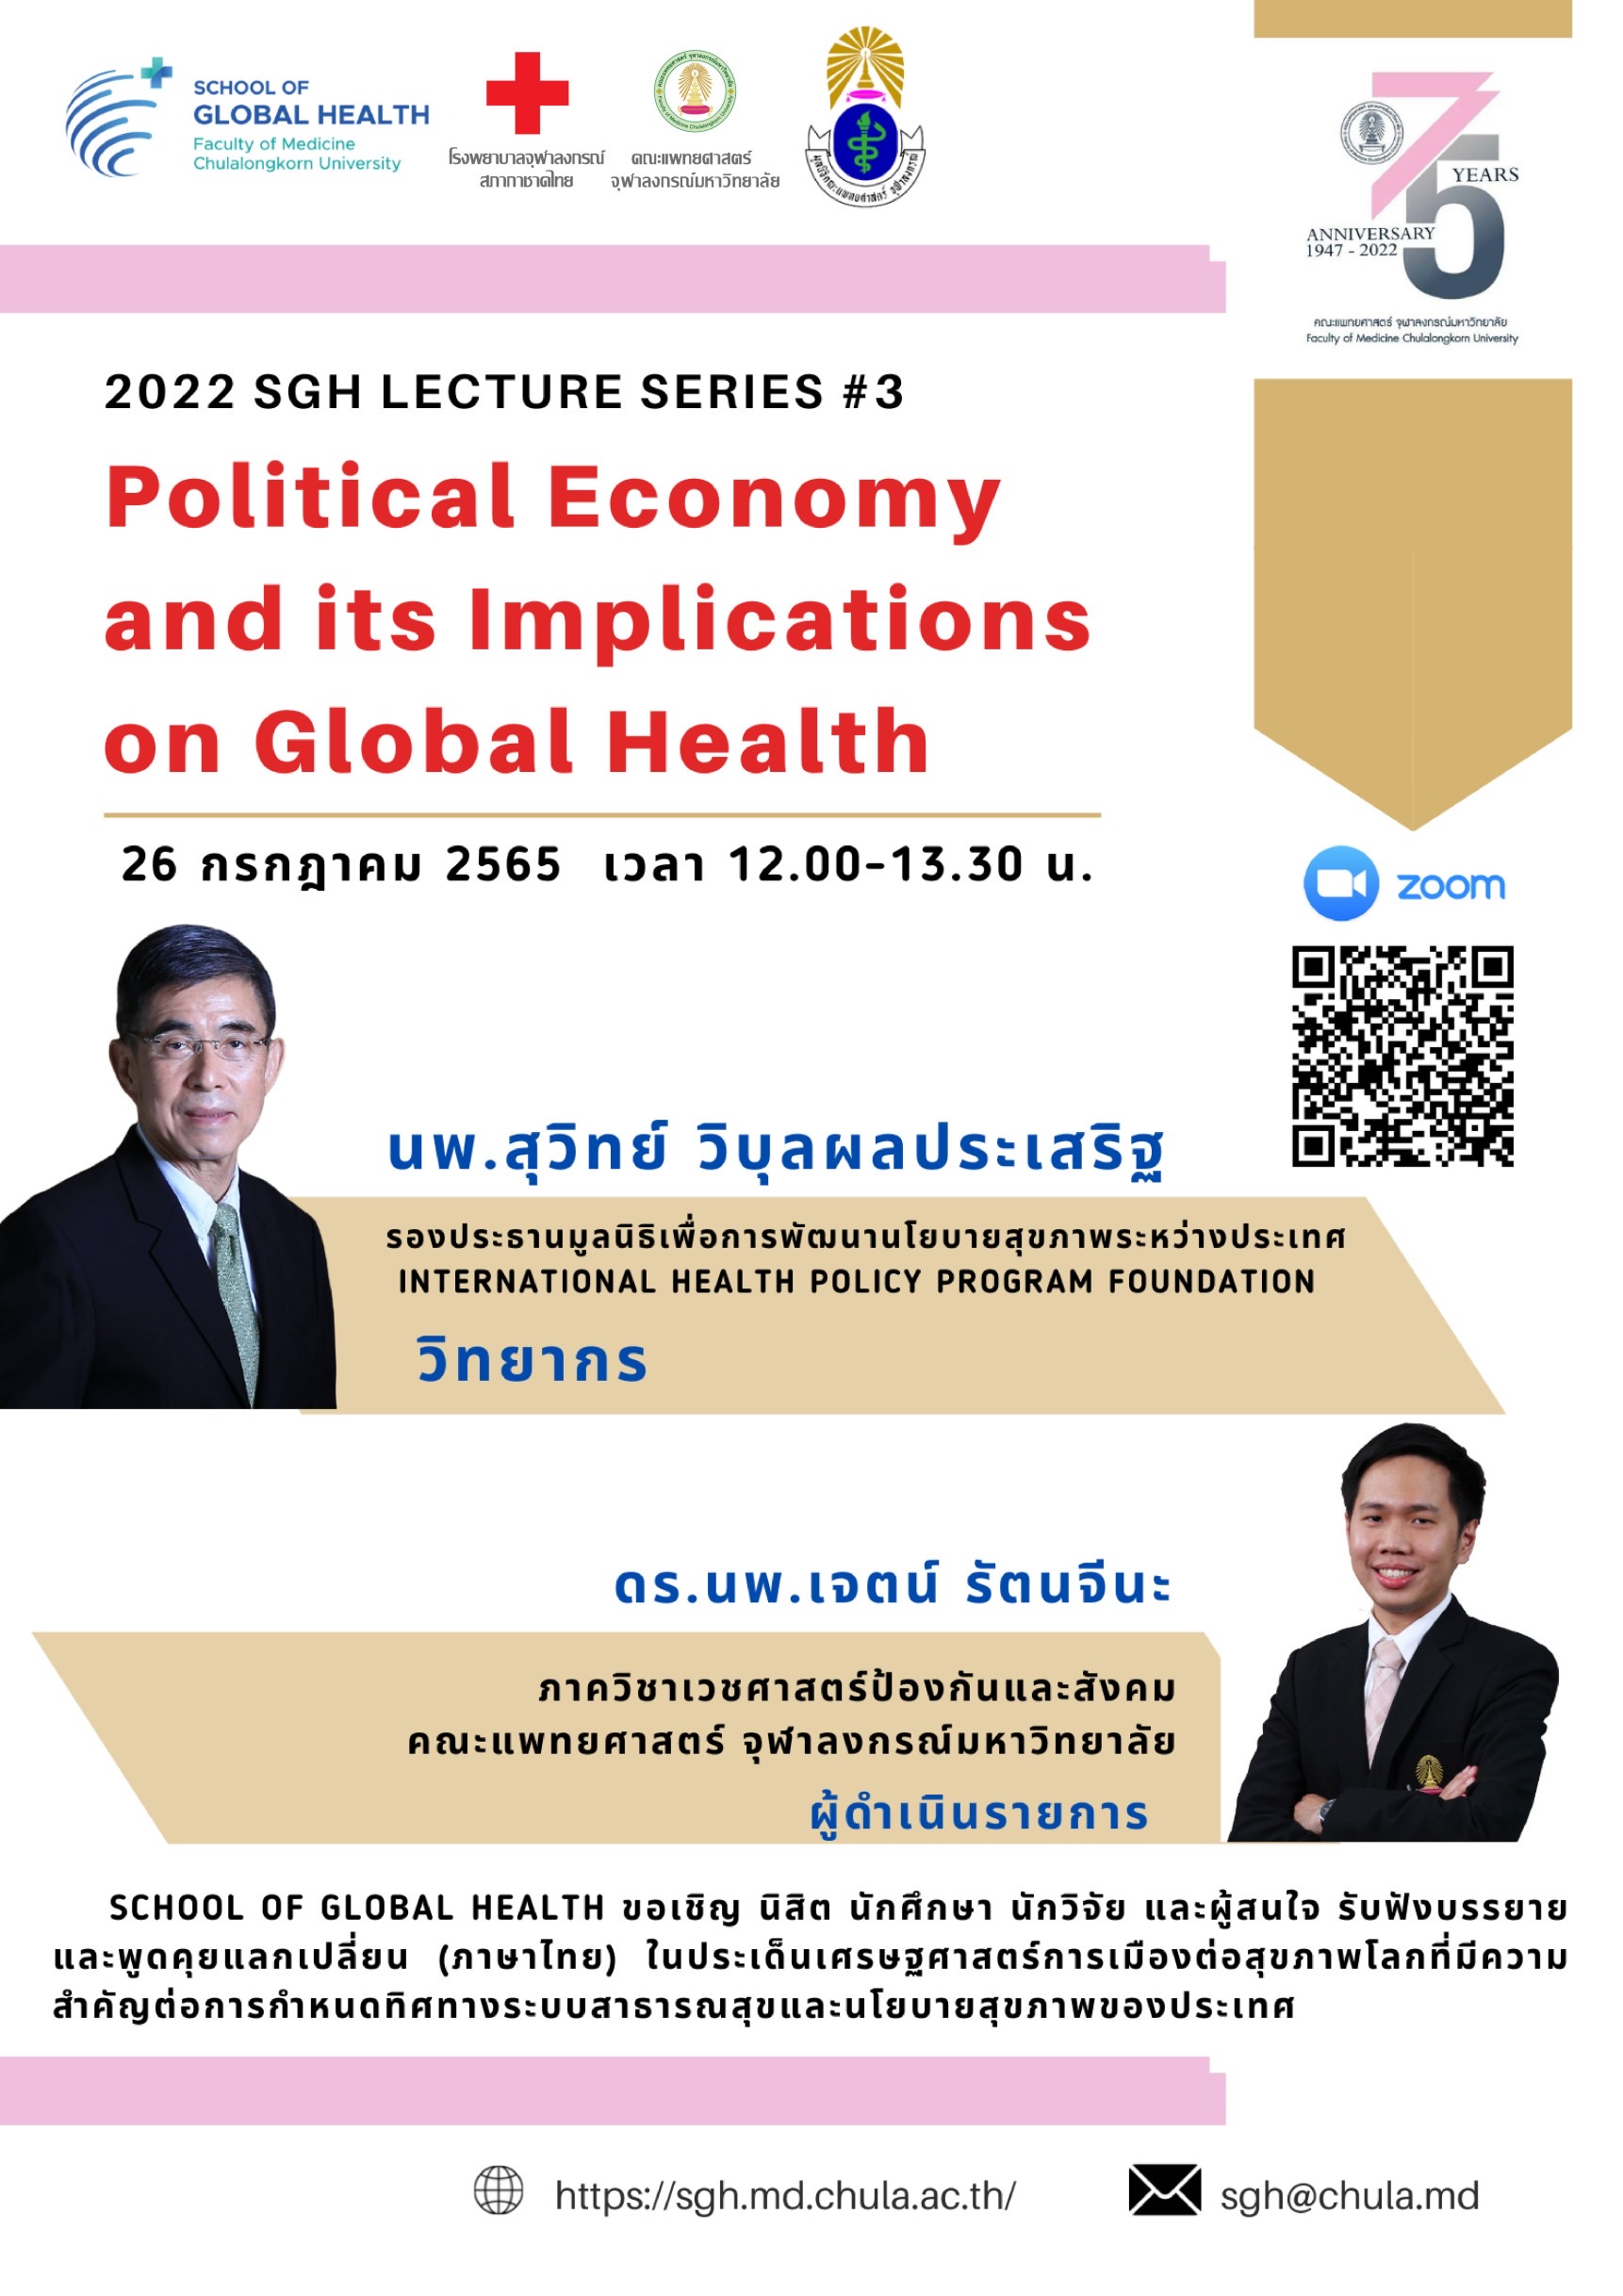 2022 SGH LECTURE SERIES #3 Political Economy and its Implications on Global Health